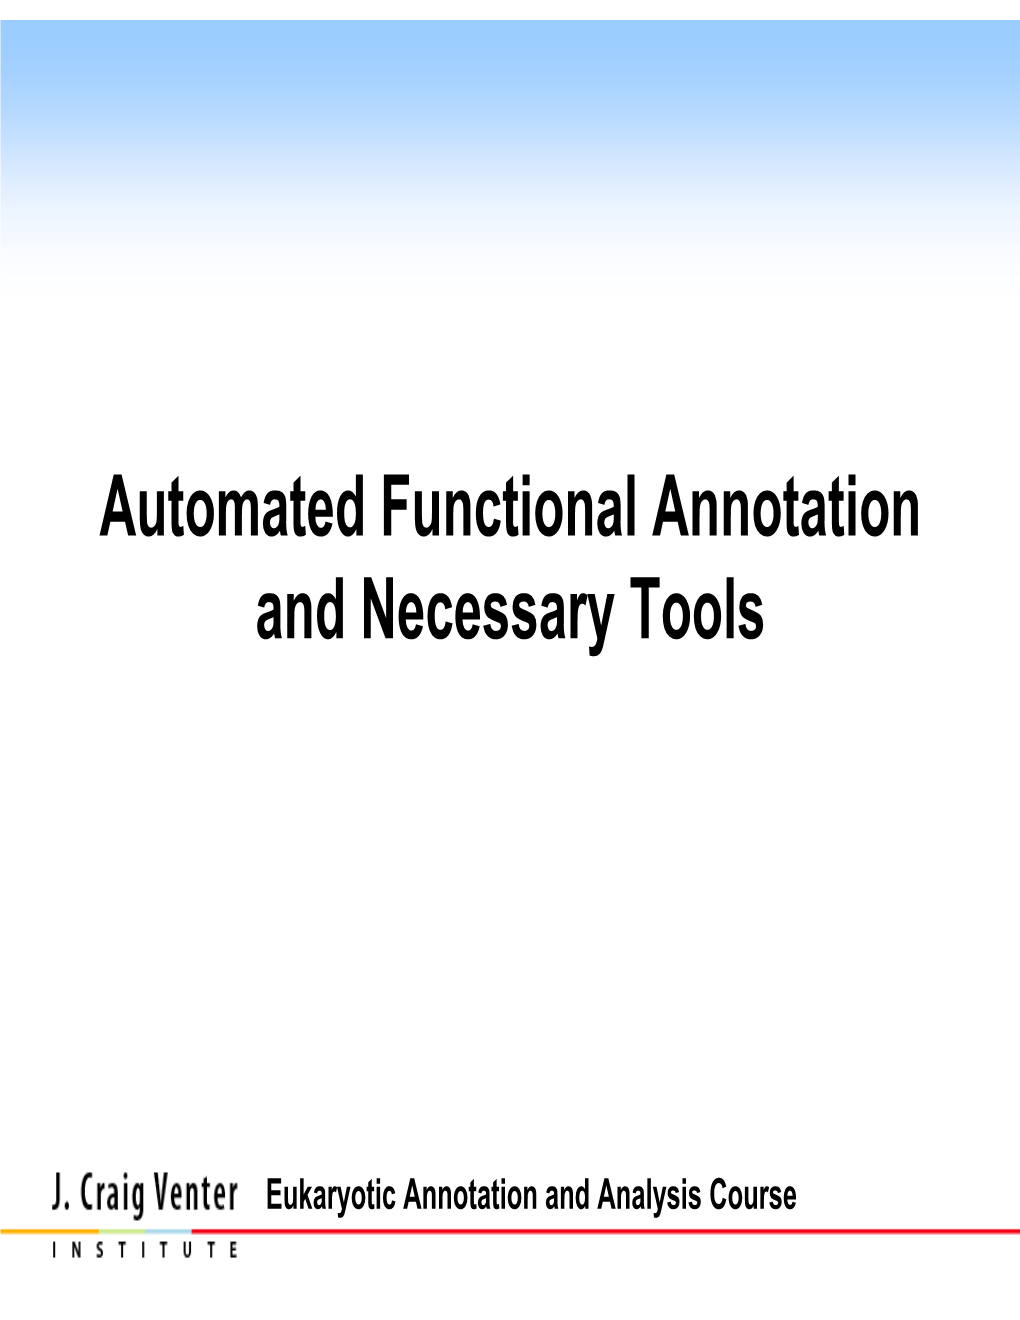 Automated Functional Annotation and Necessary Tools